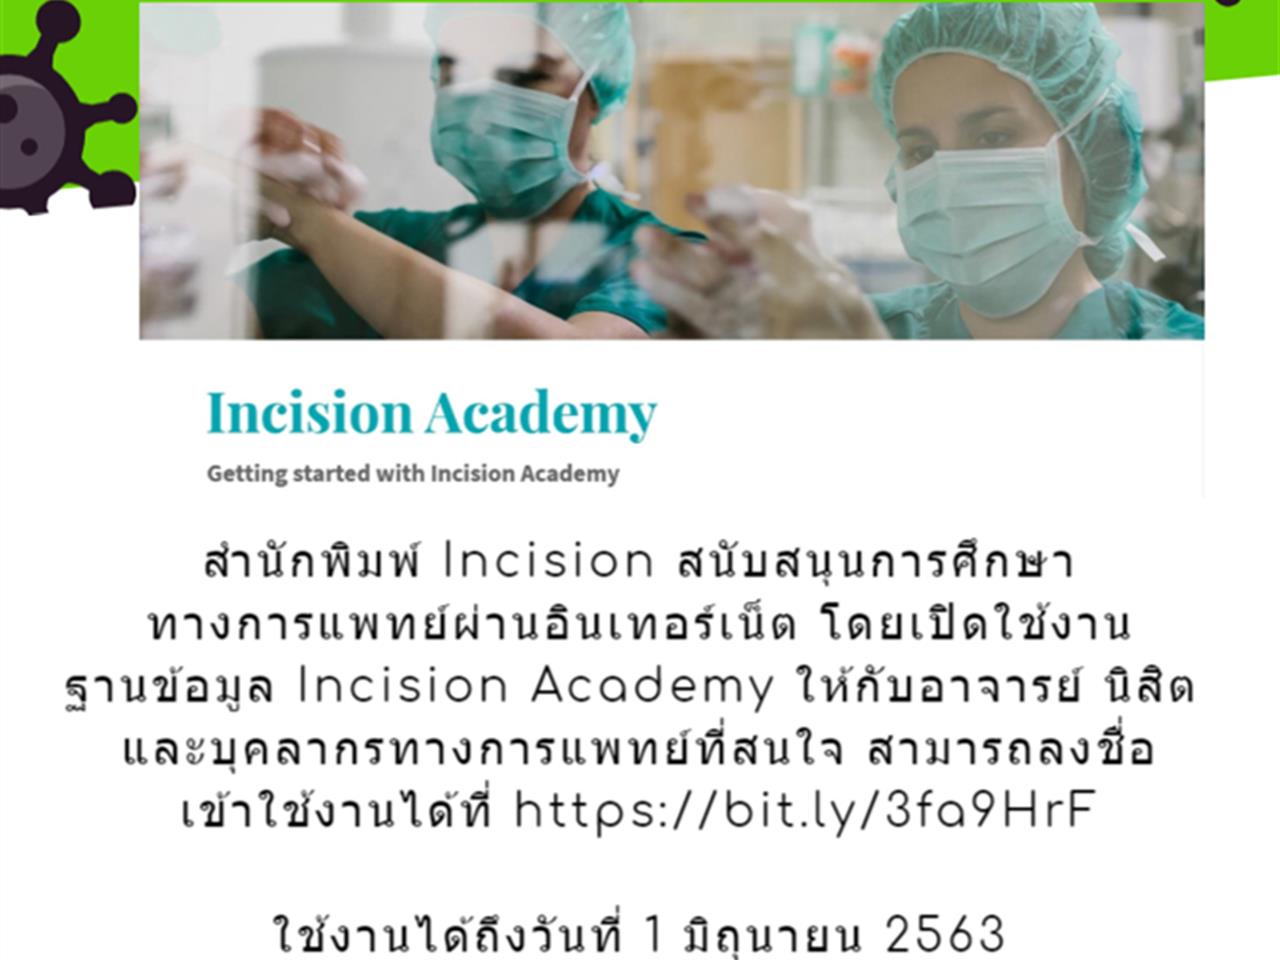 Incision Academy